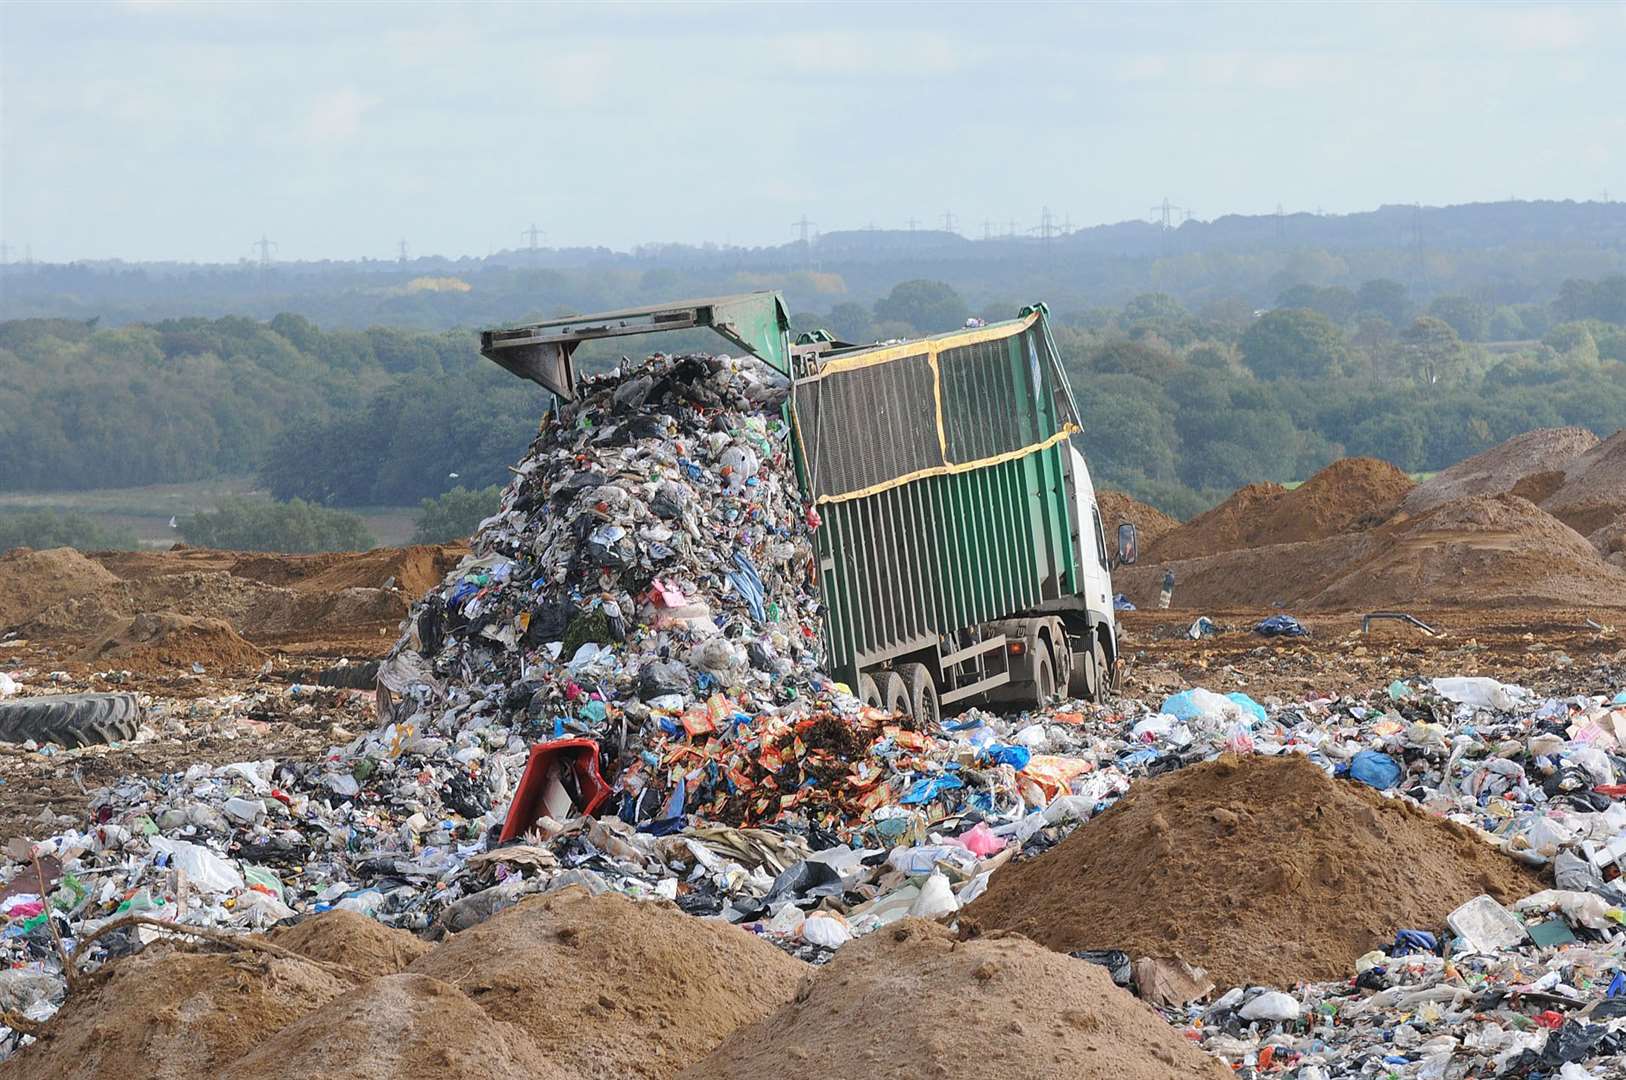 Asda says none of the collected clothes will end up in landfill